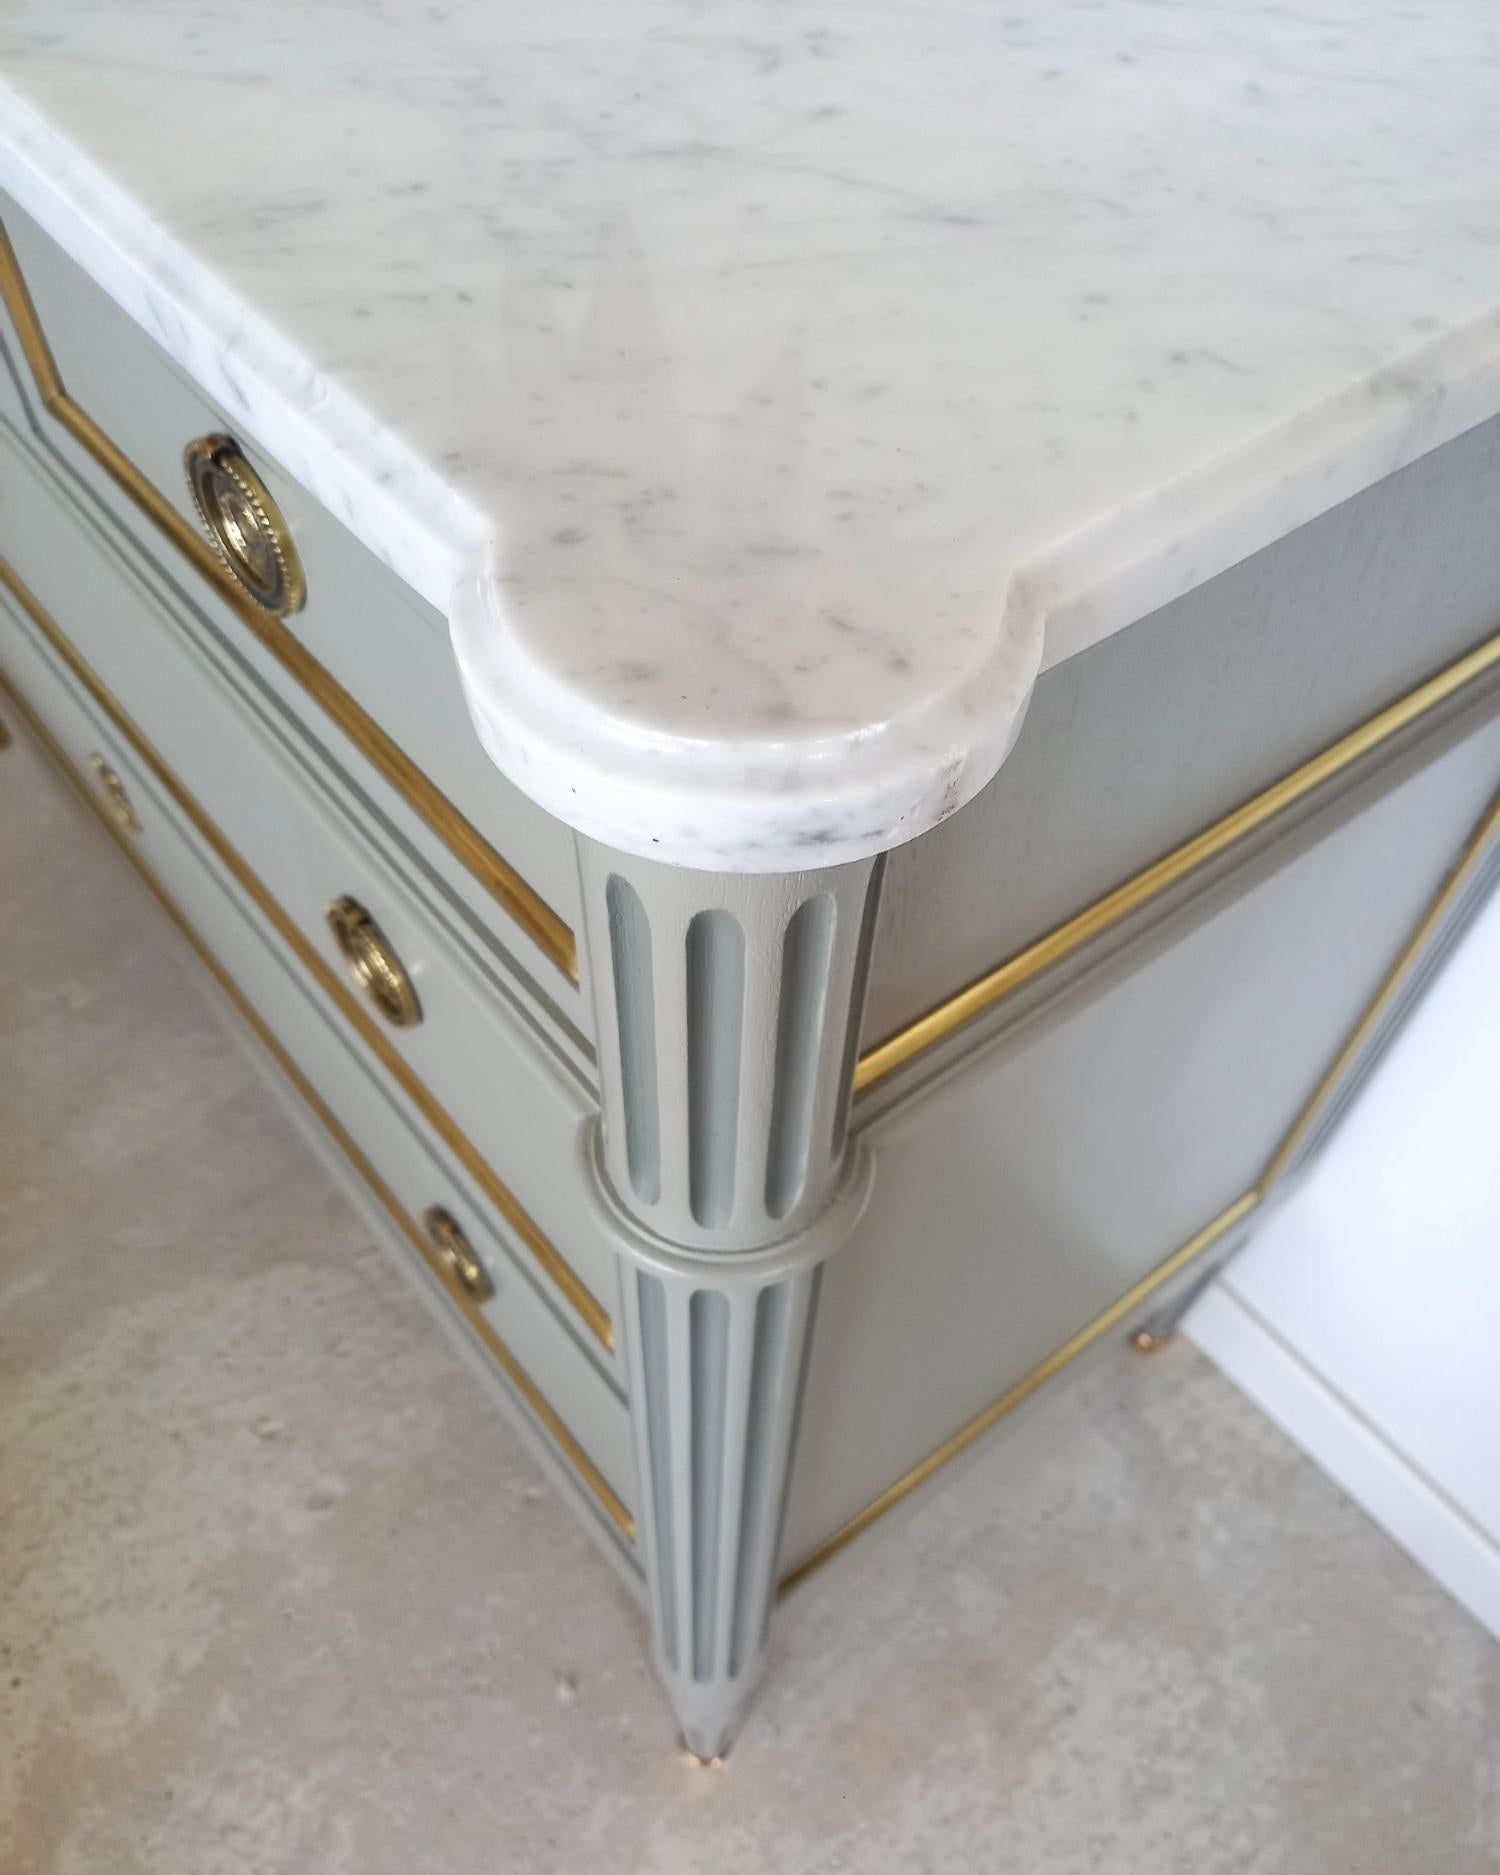 Antique French, Louis XVI style chest of drawers topped with a white Carrara marble, fluted legs finished with golden bronze clogs. 
Five dovetailed drawers with brass details, and a key, all parts are original.

